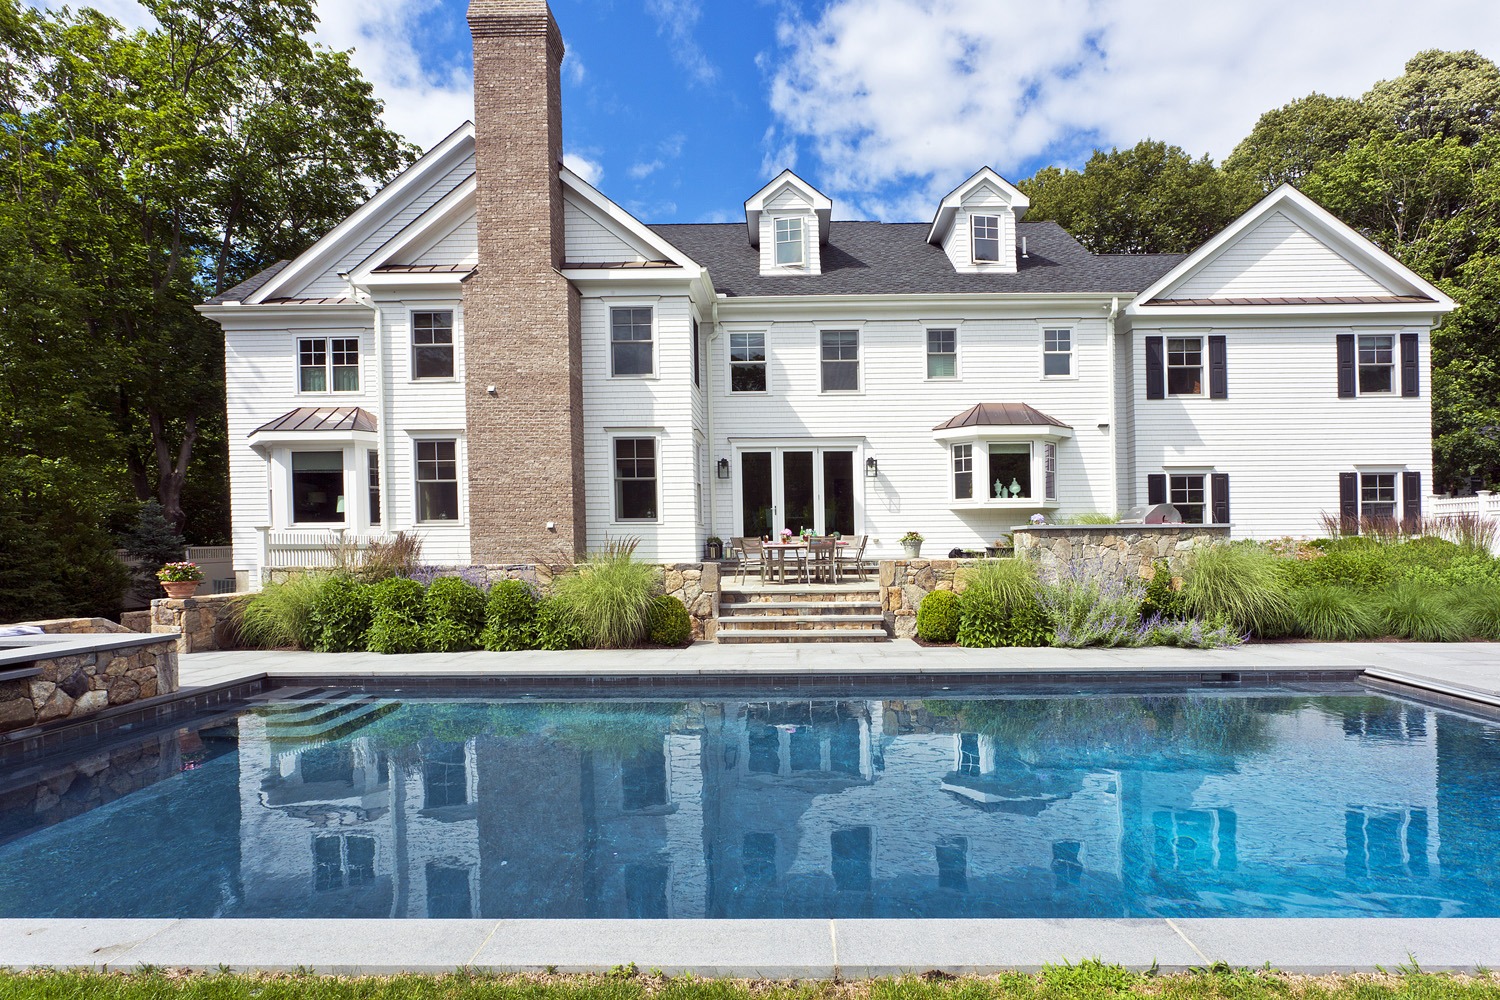 A large white house with multiple windows and chimneys reflects in a clear blue swimming pool surrounded by manicured landscaping under a sunny sky.